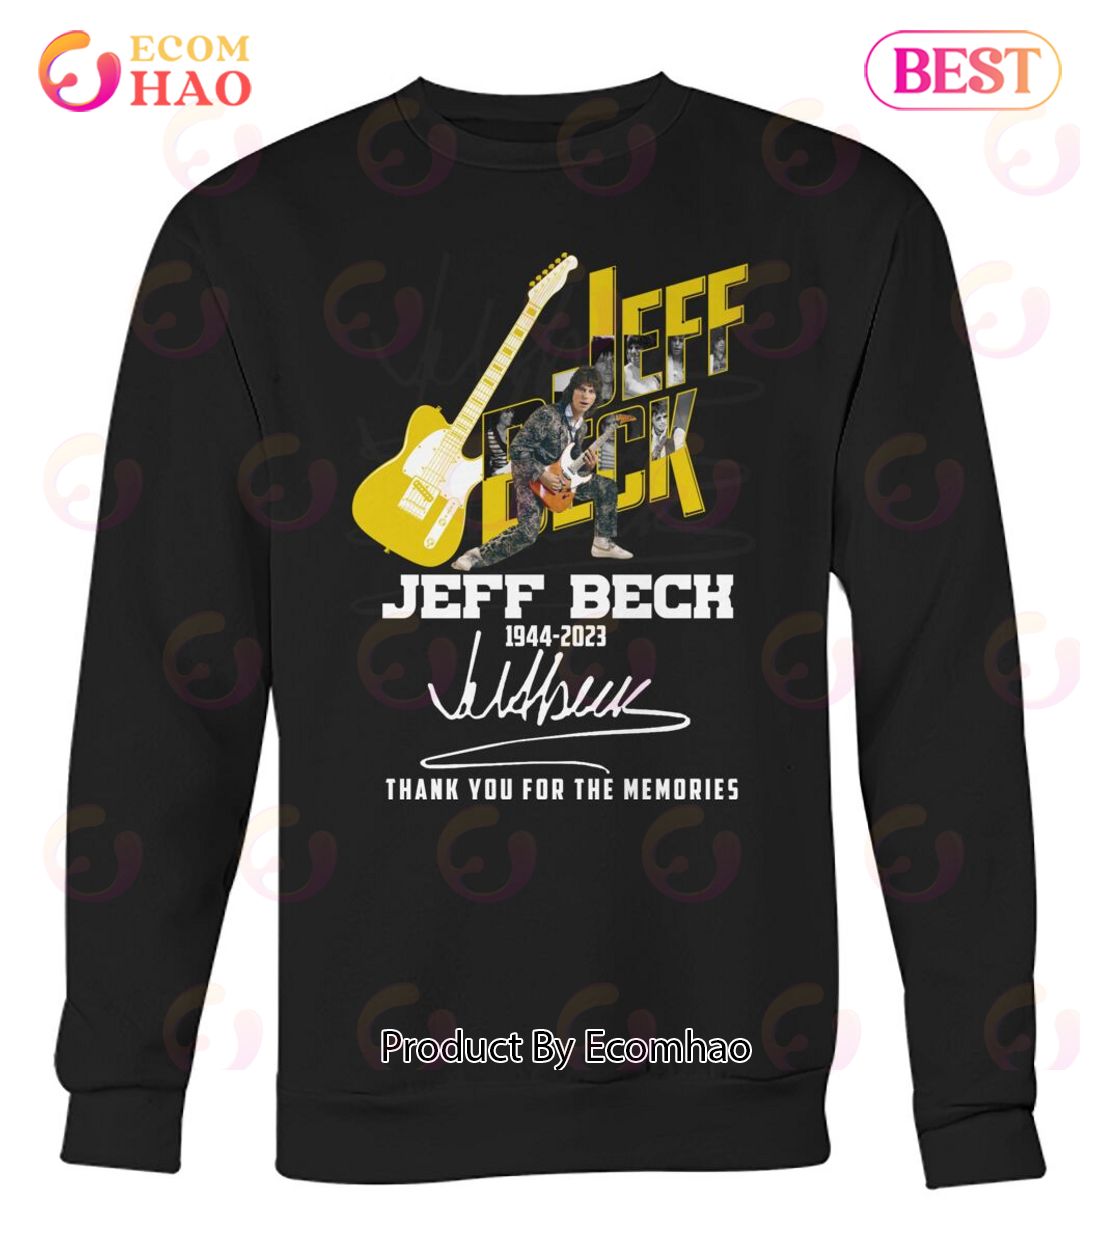 Jeff Bech 1944 - 2023 Thank You For The Memories T-Shirt